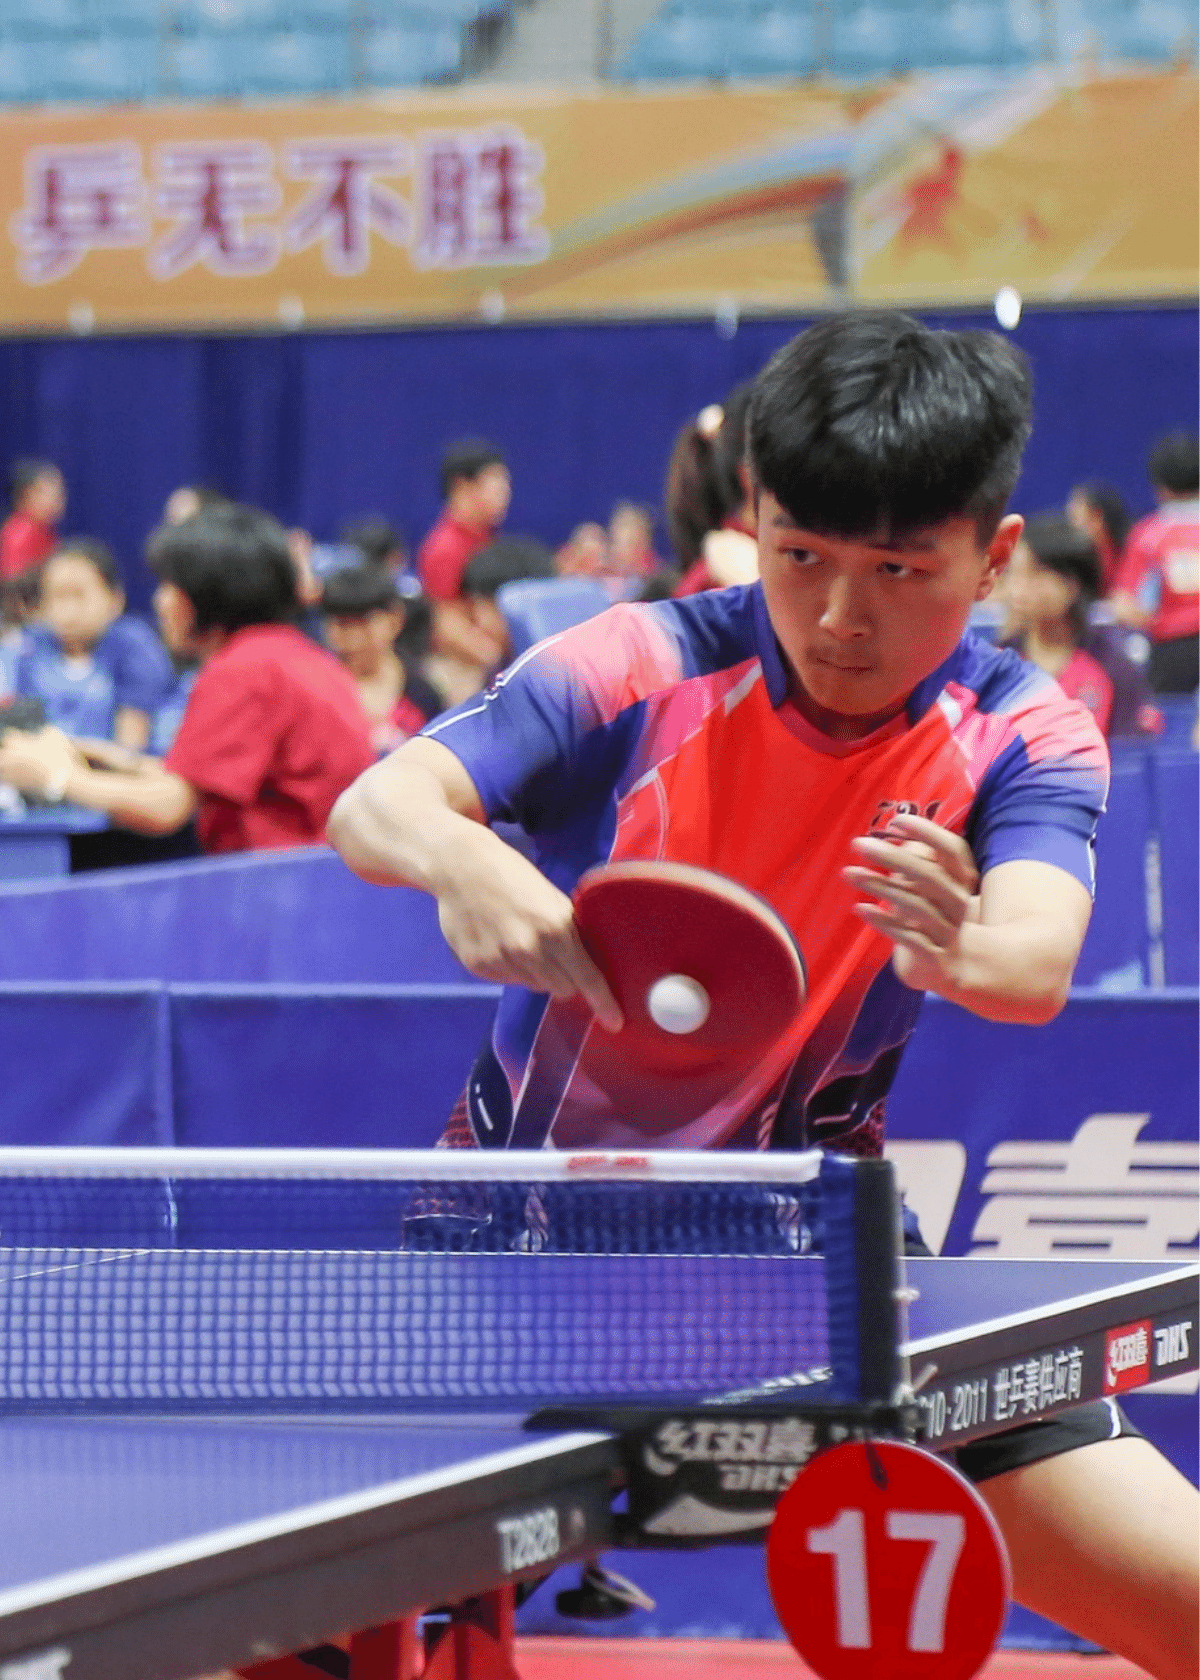 Tips for achieving the perfect Spin in Ping Pong